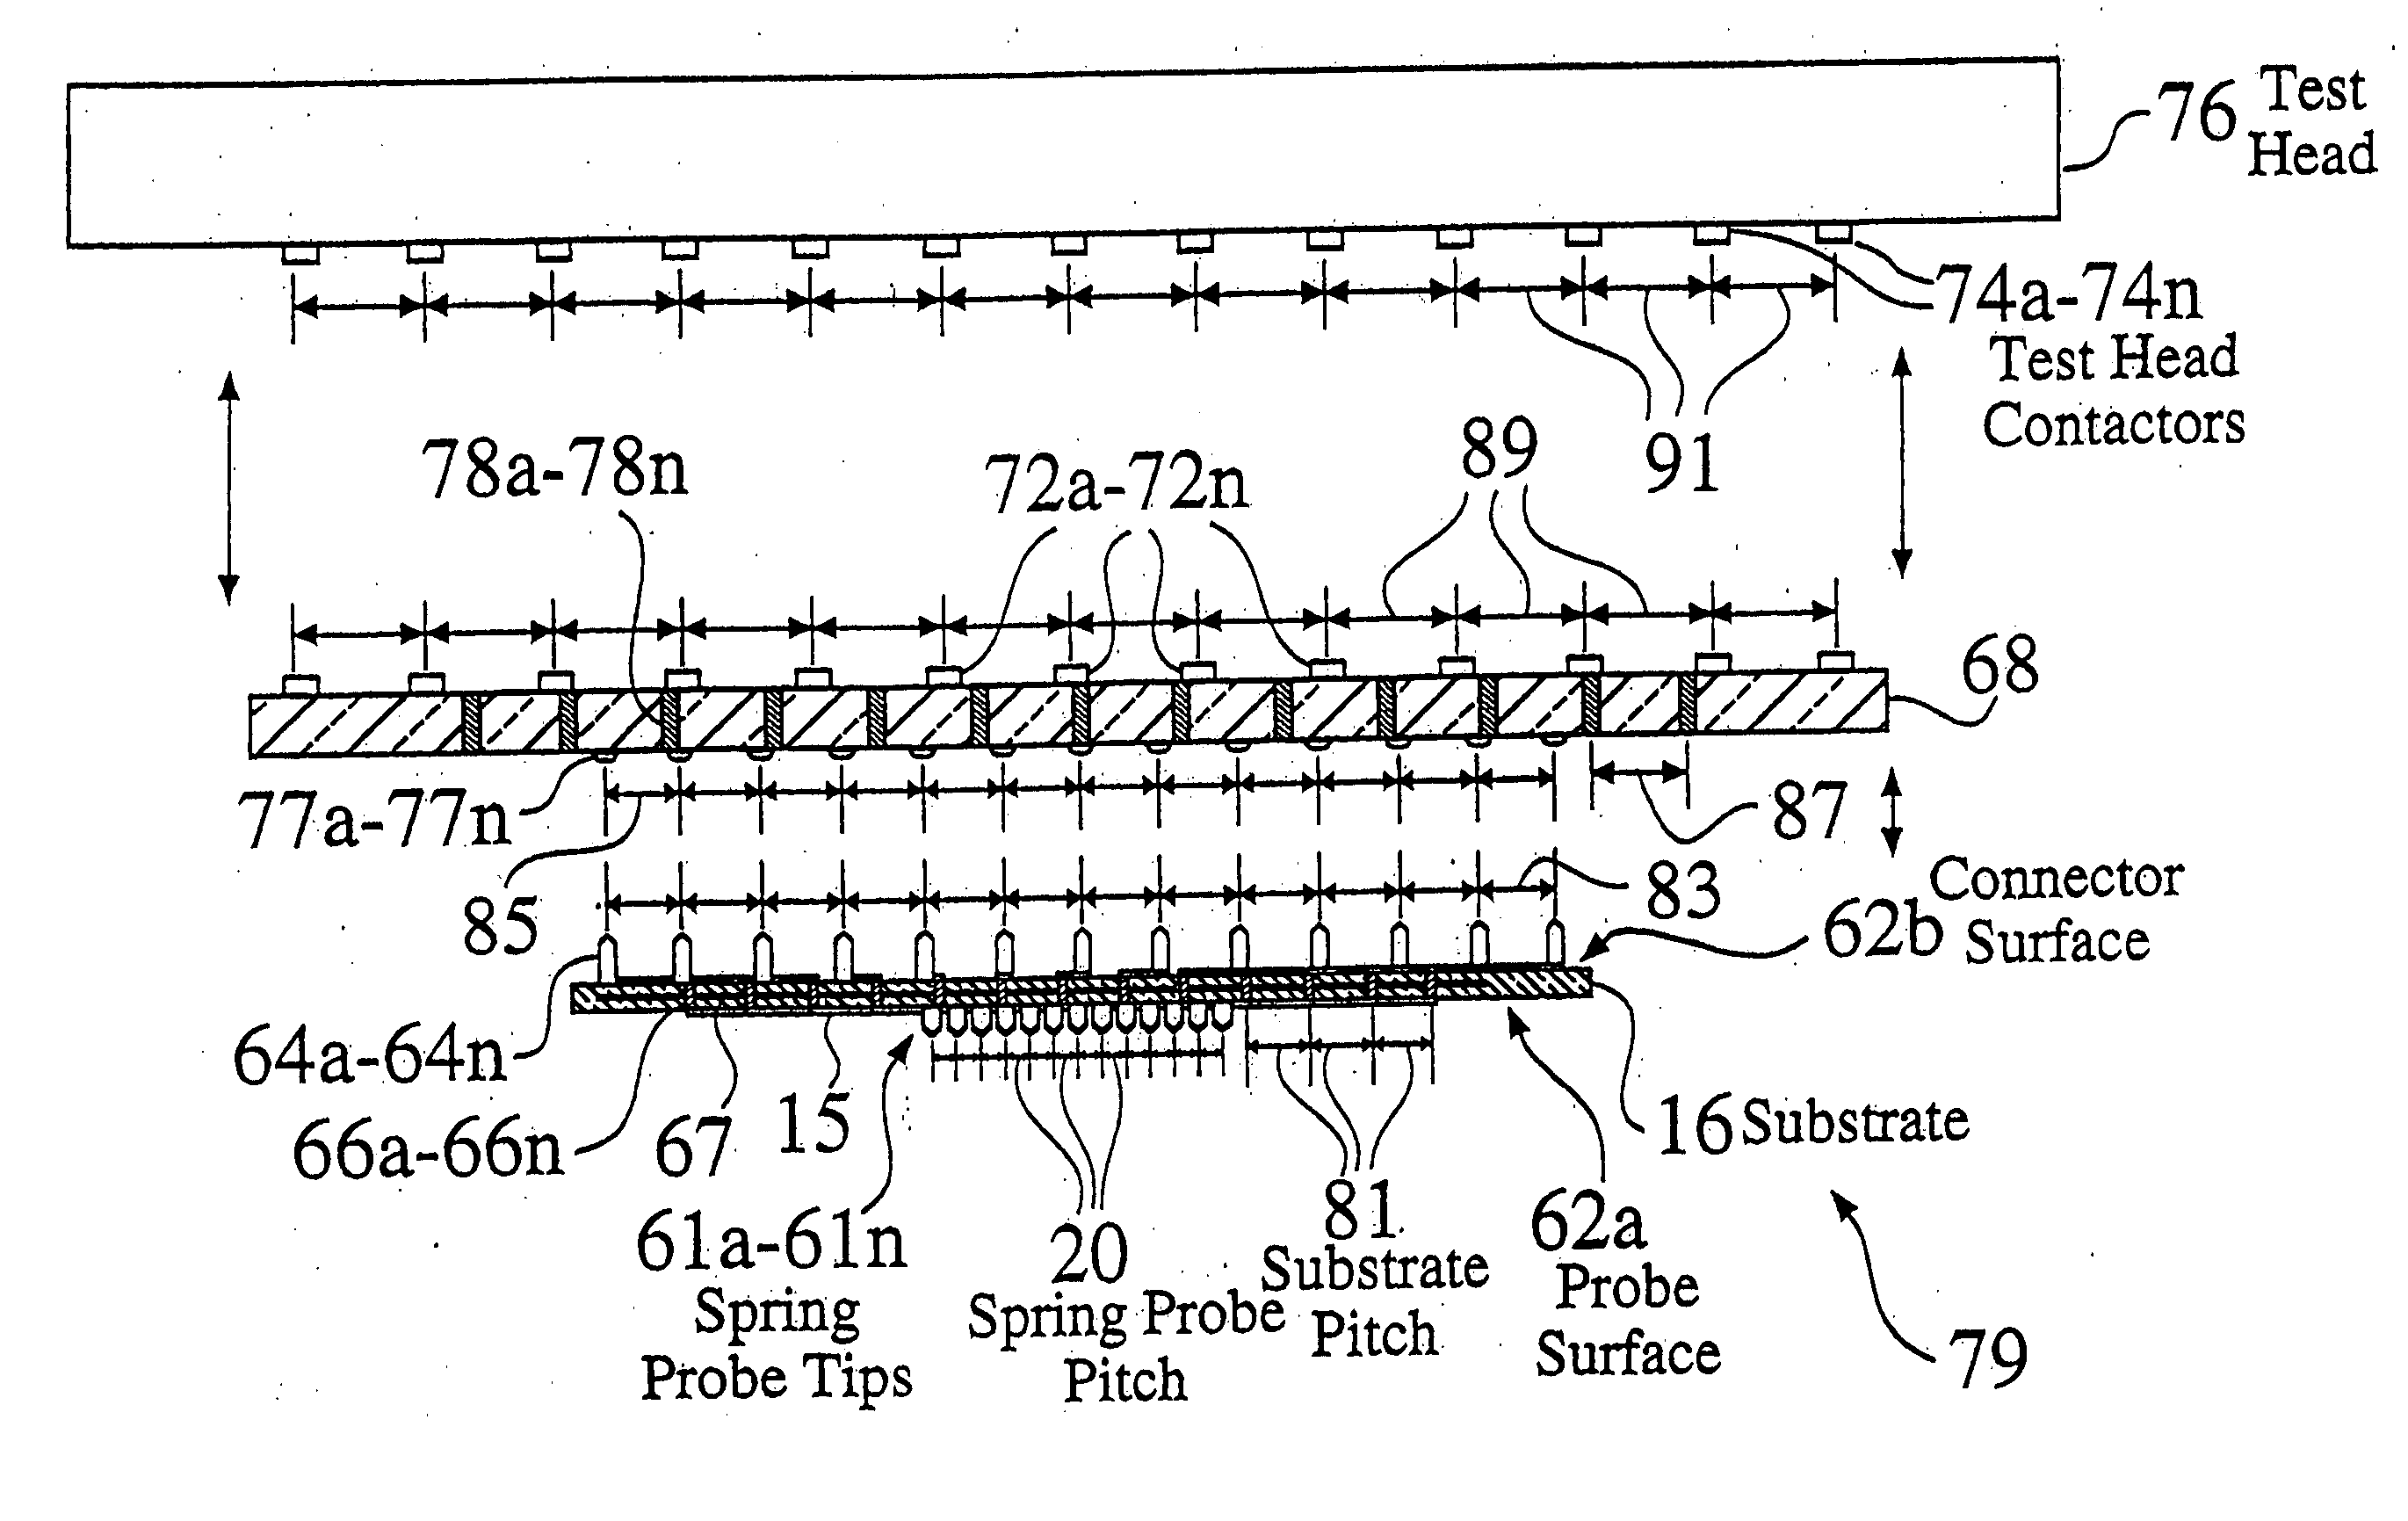 Construction structures and manufacturing processes for integrated circuit wafer probe card assemblies